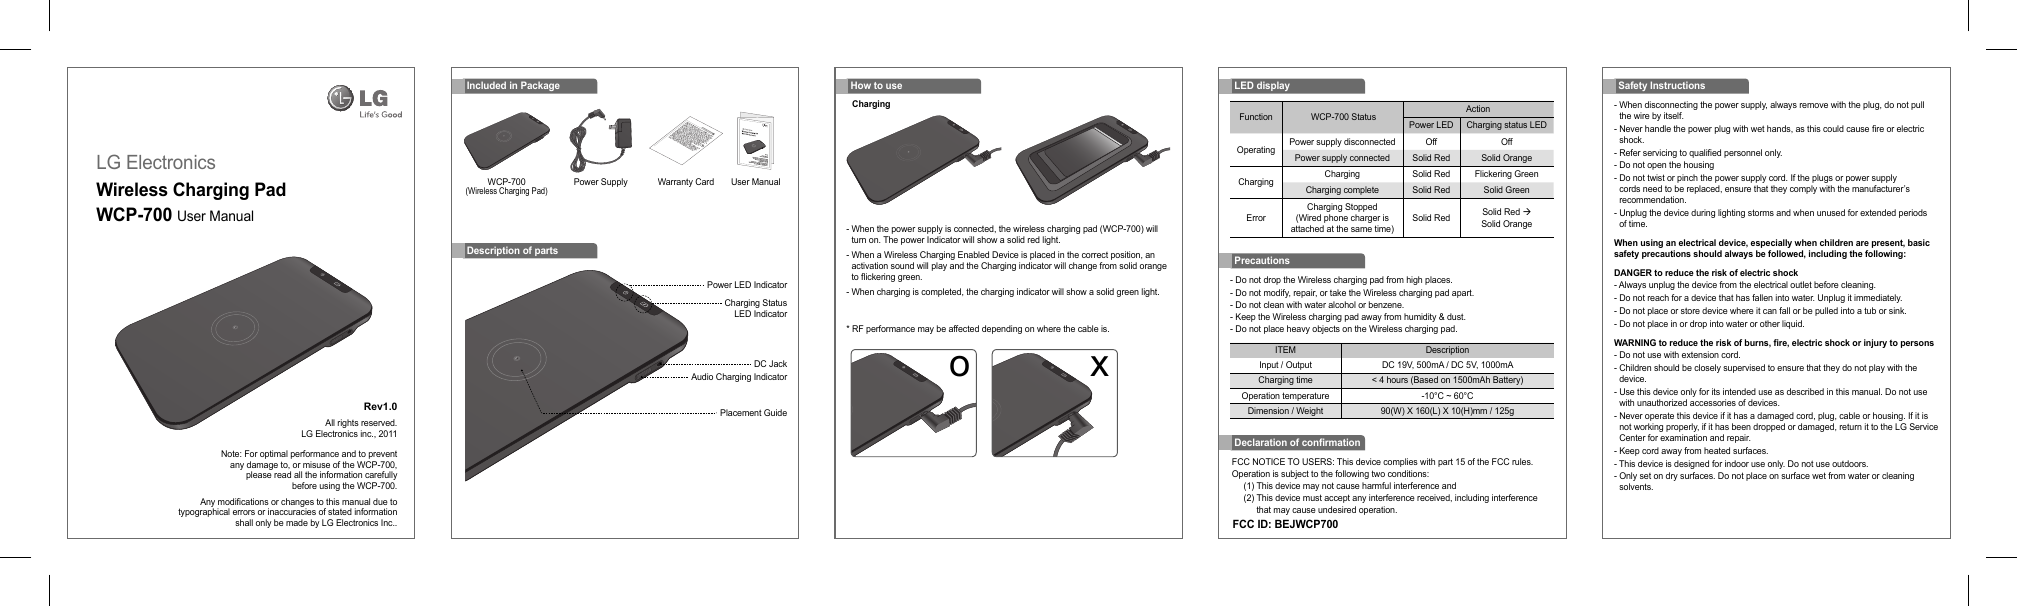 LG ElectronicsWireless Charging PadWCP-700 User Manual Rev1.0 All rights reserved.LG Electronics inc., 2011Note: For optimal performance and to preventany damage to, or misuse of the WCP-700,please read all the information carefullybefore using the WCP-700.Any modiﬁ cations or changes to this manual due totypographical errors or inaccuracies of stated informationshall only be made by LG Electronics Inc..- Do not drop the Wireless charging pad from high places.- Do not modify, repair, or take the Wireless charging pad apart.- Do not clean with water alcohol or benzene.- Keep the Wireless charging pad away from humidity &amp; dust.- Do not place heavy objects on the Wireless charging pad.PrecautionsITEM DescriptionInput / Output DC 19V, 500mA / DC 5V, 1000mACharging time &lt; 4 hours (Based on 1500mAh Battery)Operation temperature -10°C ~ 60°CDimension / Weight 90(W) X 160(L) X 10(H)mm / 125gIncluded in PackageWCP-700 (Wireless Charging Pad)Power Supply Warranty Card User ManualDescription of partsPower LED IndicatorCharging Status LED IndicatorDC JackAudio Charging IndicatorPlacement GuideFCC NOTICE TO USERS: This device complies with part 15 of the FCC rules.Operation is subject to the following two conditions:(1) This device may not cause harmful interference and(2)  This device must accept any interference received, including interference that may cause undesired operation.Declaration of conﬁ rmationFCC ID: BEJWCP700-  When disconnecting the power supply, always remove with the plug, do not pull the wire by itself.-  Never handle the power plug with wet hands, as this could cause ﬁ re or electric shock.- Refer servicing to qualiﬁ ed personnel only.- Do not open the housing-  Do not twist or pinch the power supply cord. If the plugs or power supply cords need to be replaced, ensure that they comply with the manufacturer’s recommendation.-  Unplug the device during lighting storms and when unused for extended periods of time.When using an electrical device, especially when children are present, basic safety precautions should always be followed, including the following:DANGER to reduce the risk of electric shock- Always unplug the device from the electrical outlet before cleaning.- Do not reach for a device that has fallen into water. Unplug it immediately.- Do not place or store device where it can fall or be pulled into a tub or sink.- Do not place in or drop into water or other liquid.WARNING to reduce the risk of burns, ﬁ re, electric shock or injury to persons- Do not use with extension cord.-  Children should be closely supervised to ensure that they do not play with the device.-  Use this device only for its intended use as described in this manual. Do not use with unauthorized accessories of devices.-  Never operate this device if it has a damaged cord, plug, cable or housing. If it is not working properly, if it has been dropped or damaged, return it to the LG Service Center for examination and repair.- Keep cord away from heated surfaces.- This device is designed for indoor use only. Do not use outdoors.-  Only set on dry surfaces. Do not place on surface wet from water or cleaning solvents.Safety InstructionsFunction  WCP-700 Status ActionPower LED Charging status LEDOperating Power supply disconnected Off OffPower supply connected Solid Red Solid OrangeCharging Charging Solid Red Flickering GreenCharging complete Solid Red Solid GreenErrorCharging Stopped (Wired phone charger is attached at the same time)Solid Red Solid Red Æ Solid OrangeLED display-  When the power supply is connected, the wireless charging pad (WCP-700) will turn on. The power Indicator will show a solid red light.-  When a Wireless Charging Enabled Device is placed in the correct position, an activation sound will play and the Charging indicator will change from solid orange to ﬂ ickering green.-  When charging is completed, the charging indicator will show a solid green light.*  RF performance may be affected depending on where the cable is.How to useChargingo x